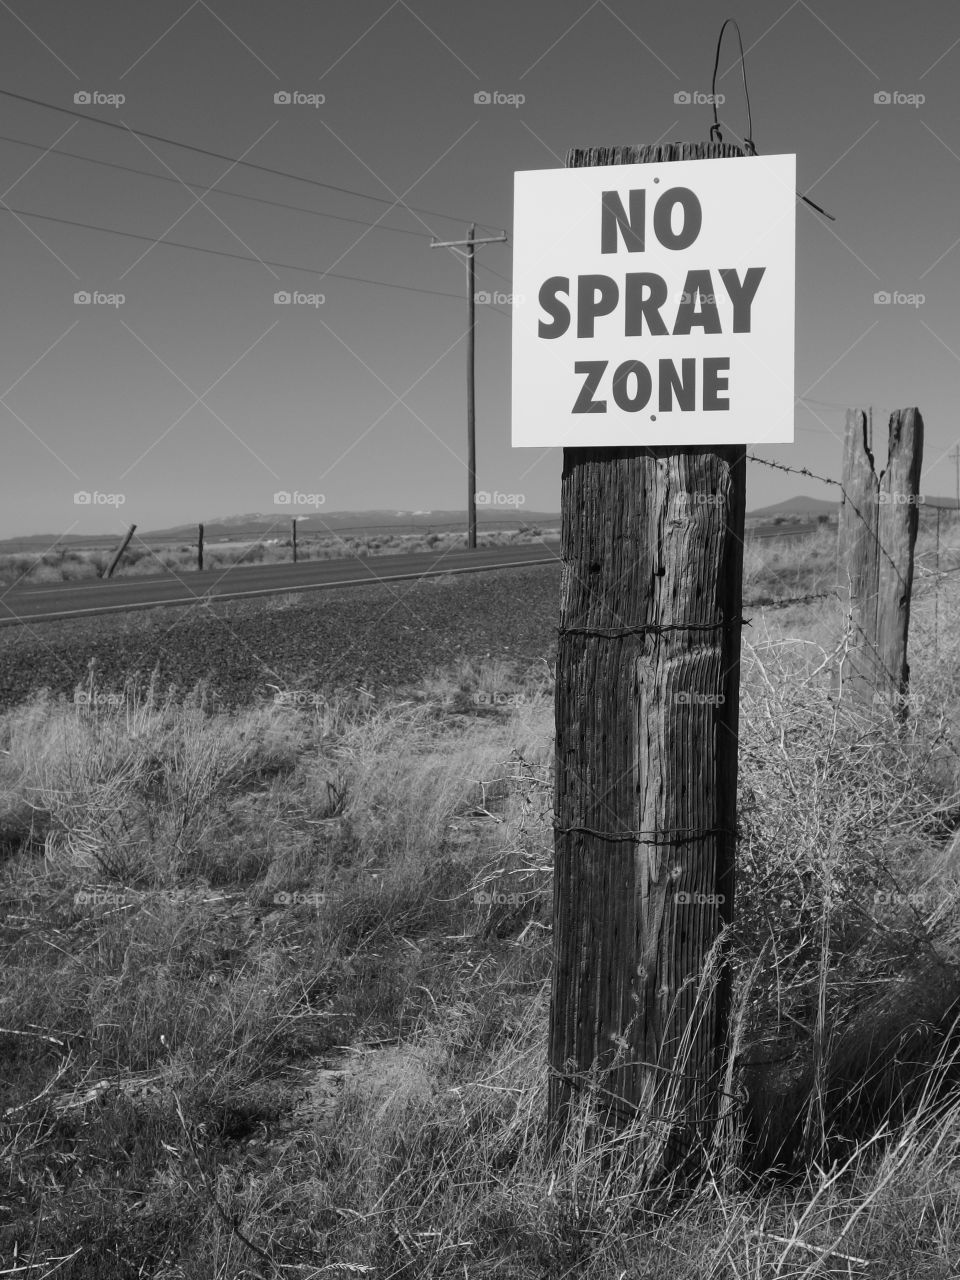 This sign isolates an area in hay fields outside of Christmas Valley in Eastern Oregon as a @No Spray Zone". 